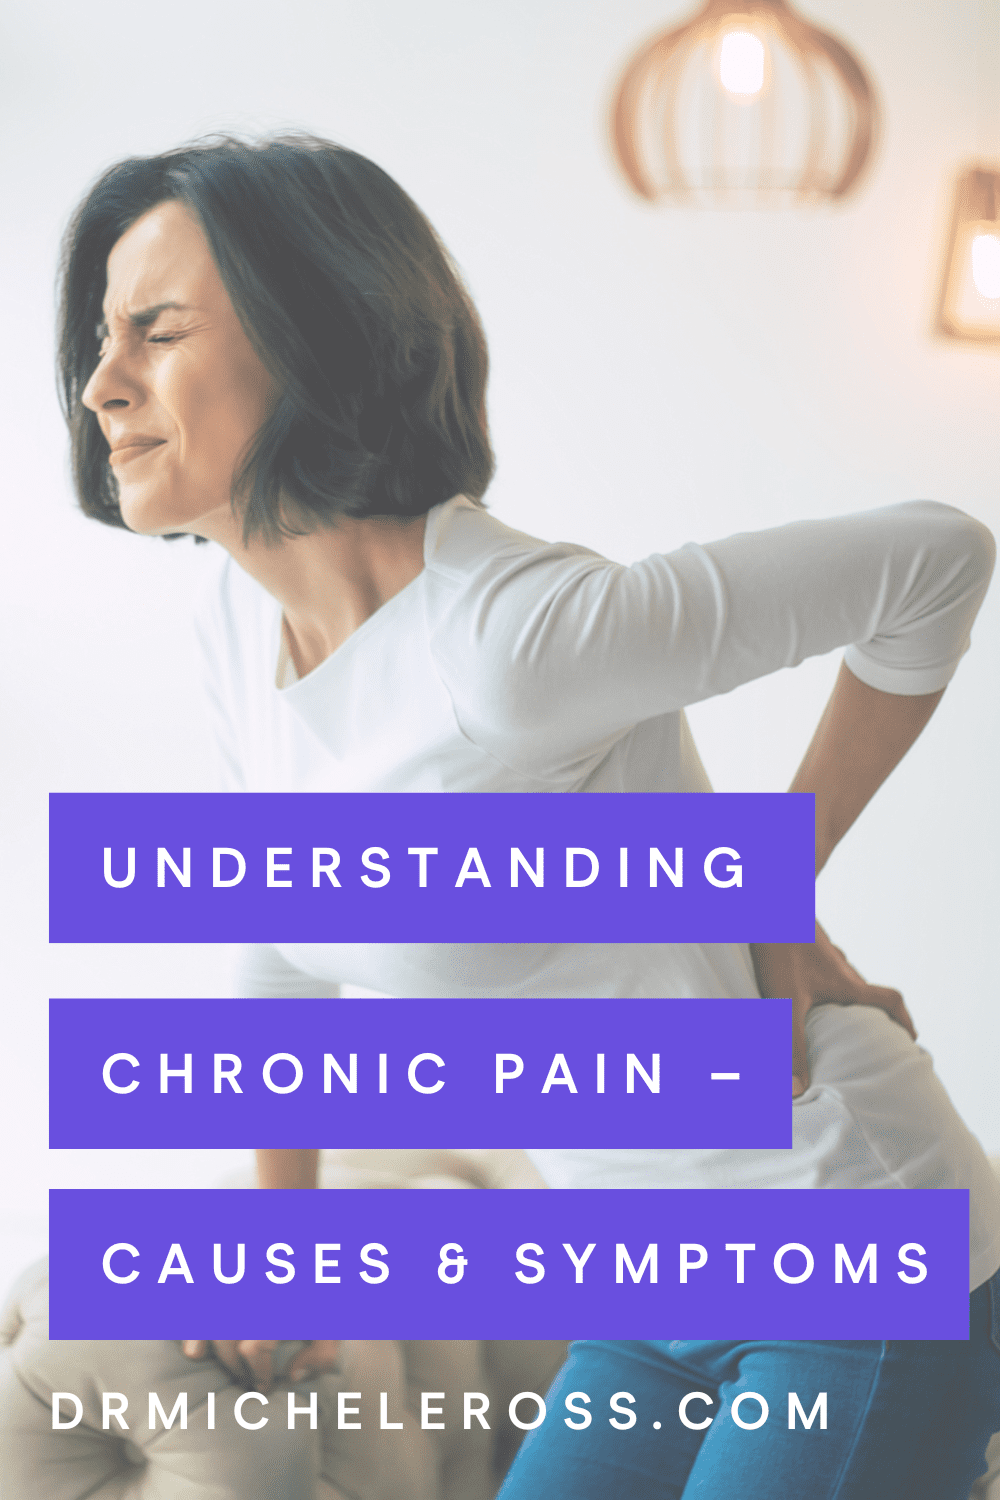 Understanding Chronic Pain - Causes, Symptoms, and Treatment